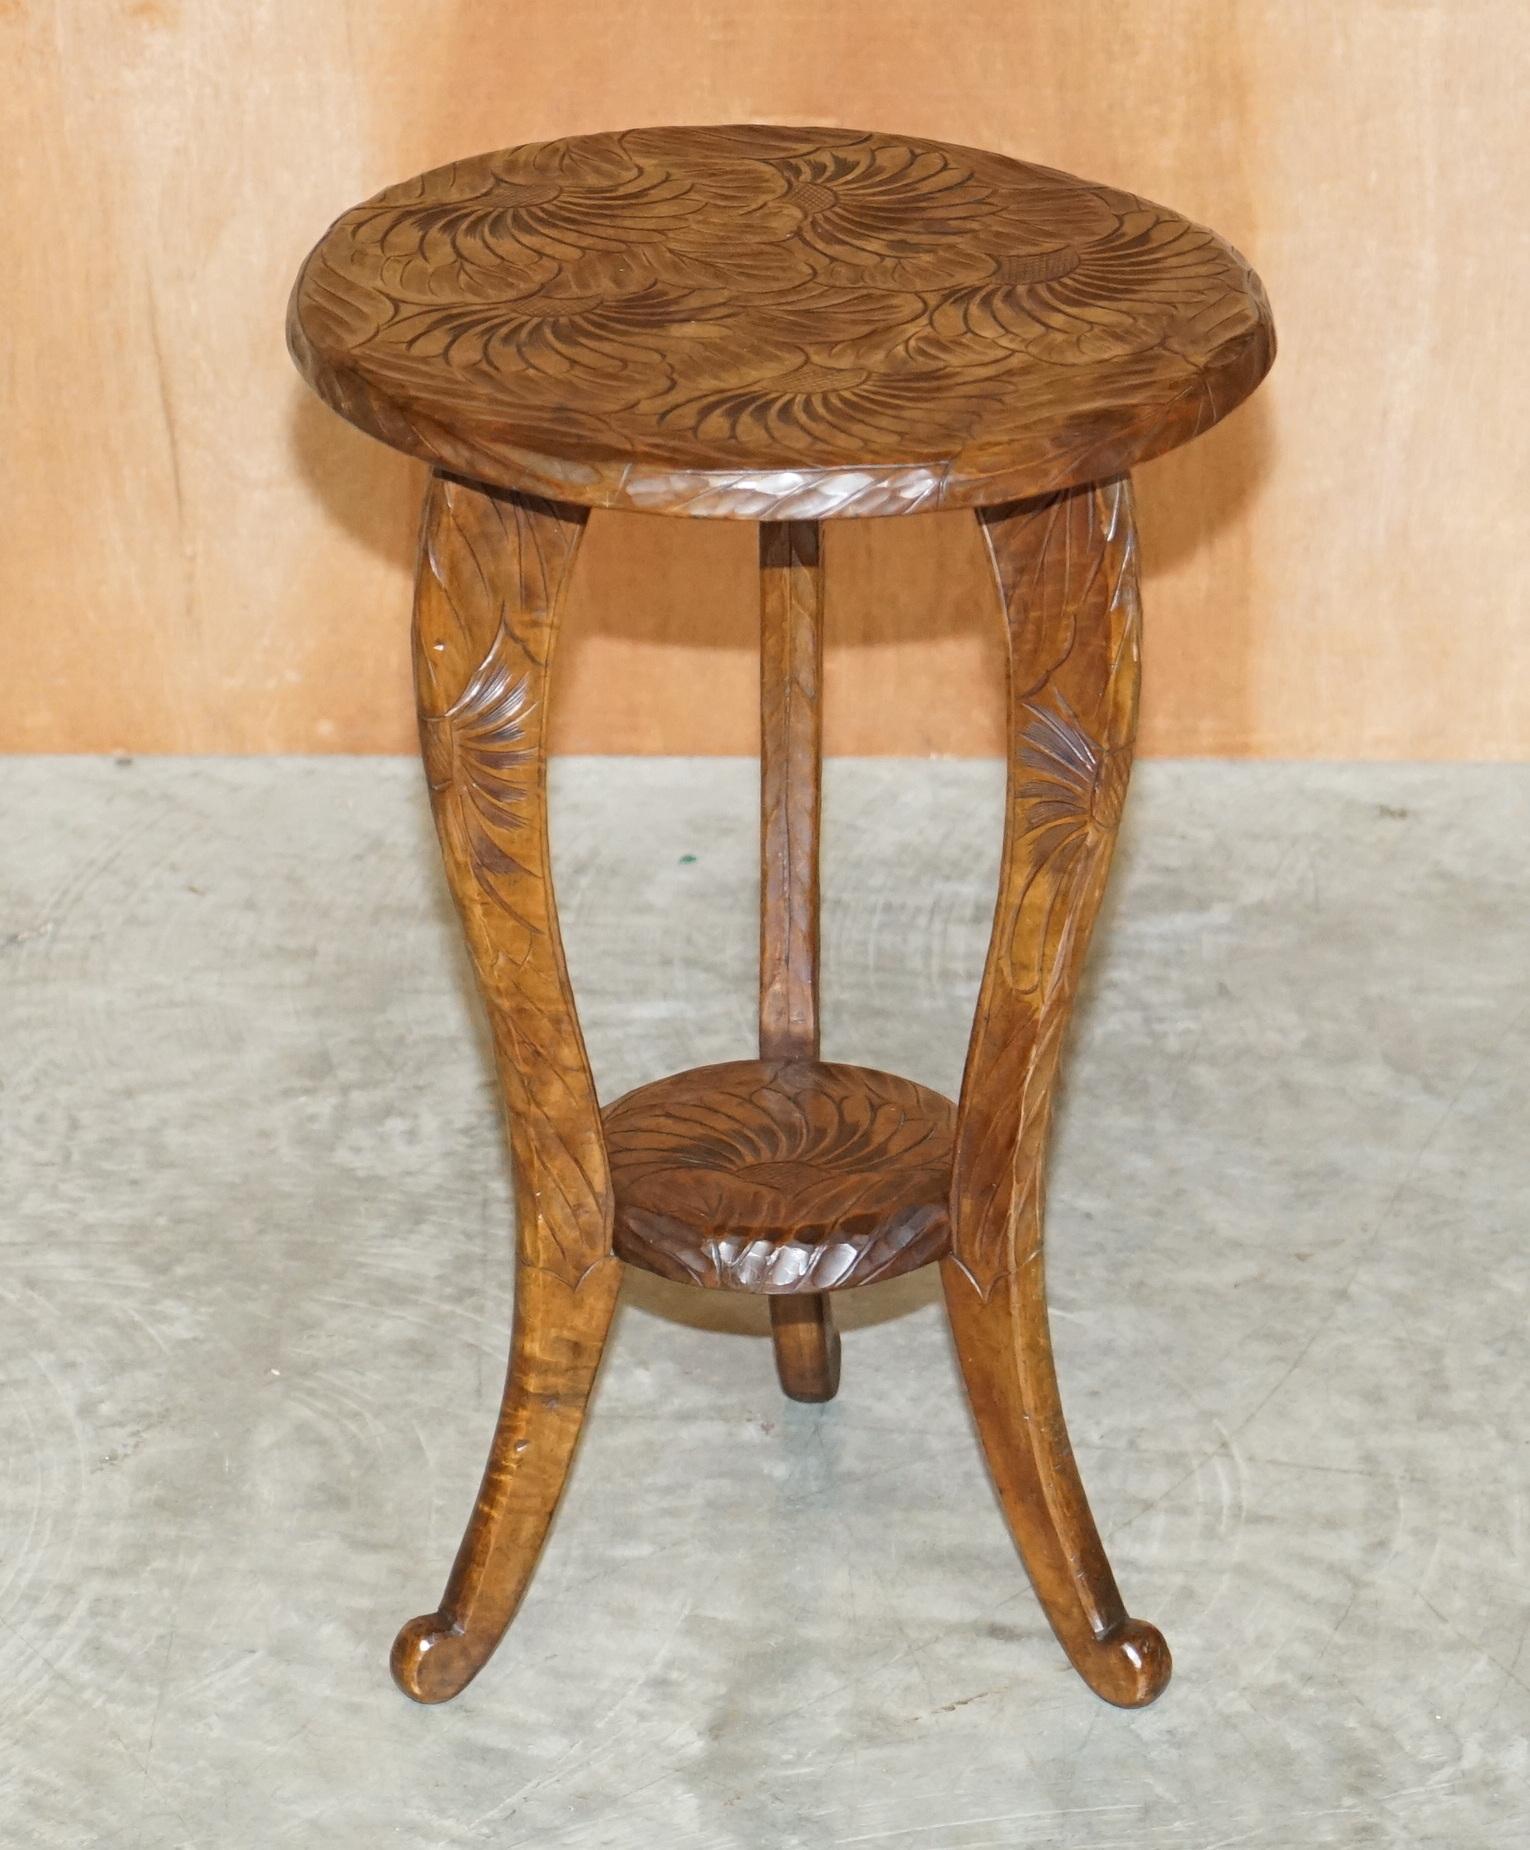 We are delighted to offer for sale this lovely Liberty’s London 1905 oriental mahogany side table.

A good-looking piece, its hand carved from top to bottom with floral detailing, I have variations of these types of tables and one very rare chair